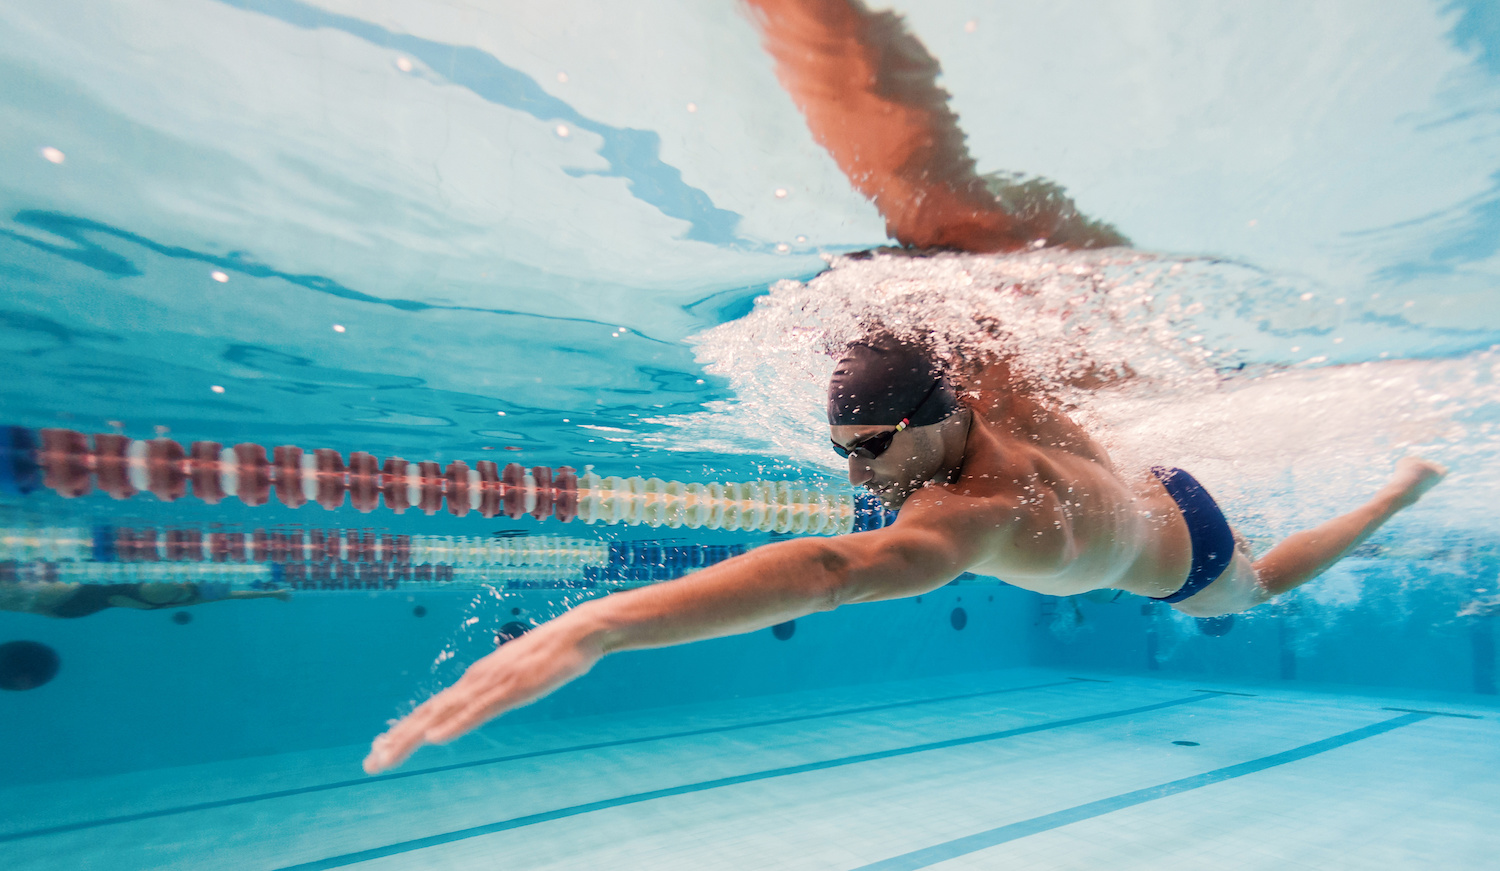 A lean and muscular athlete swimming.